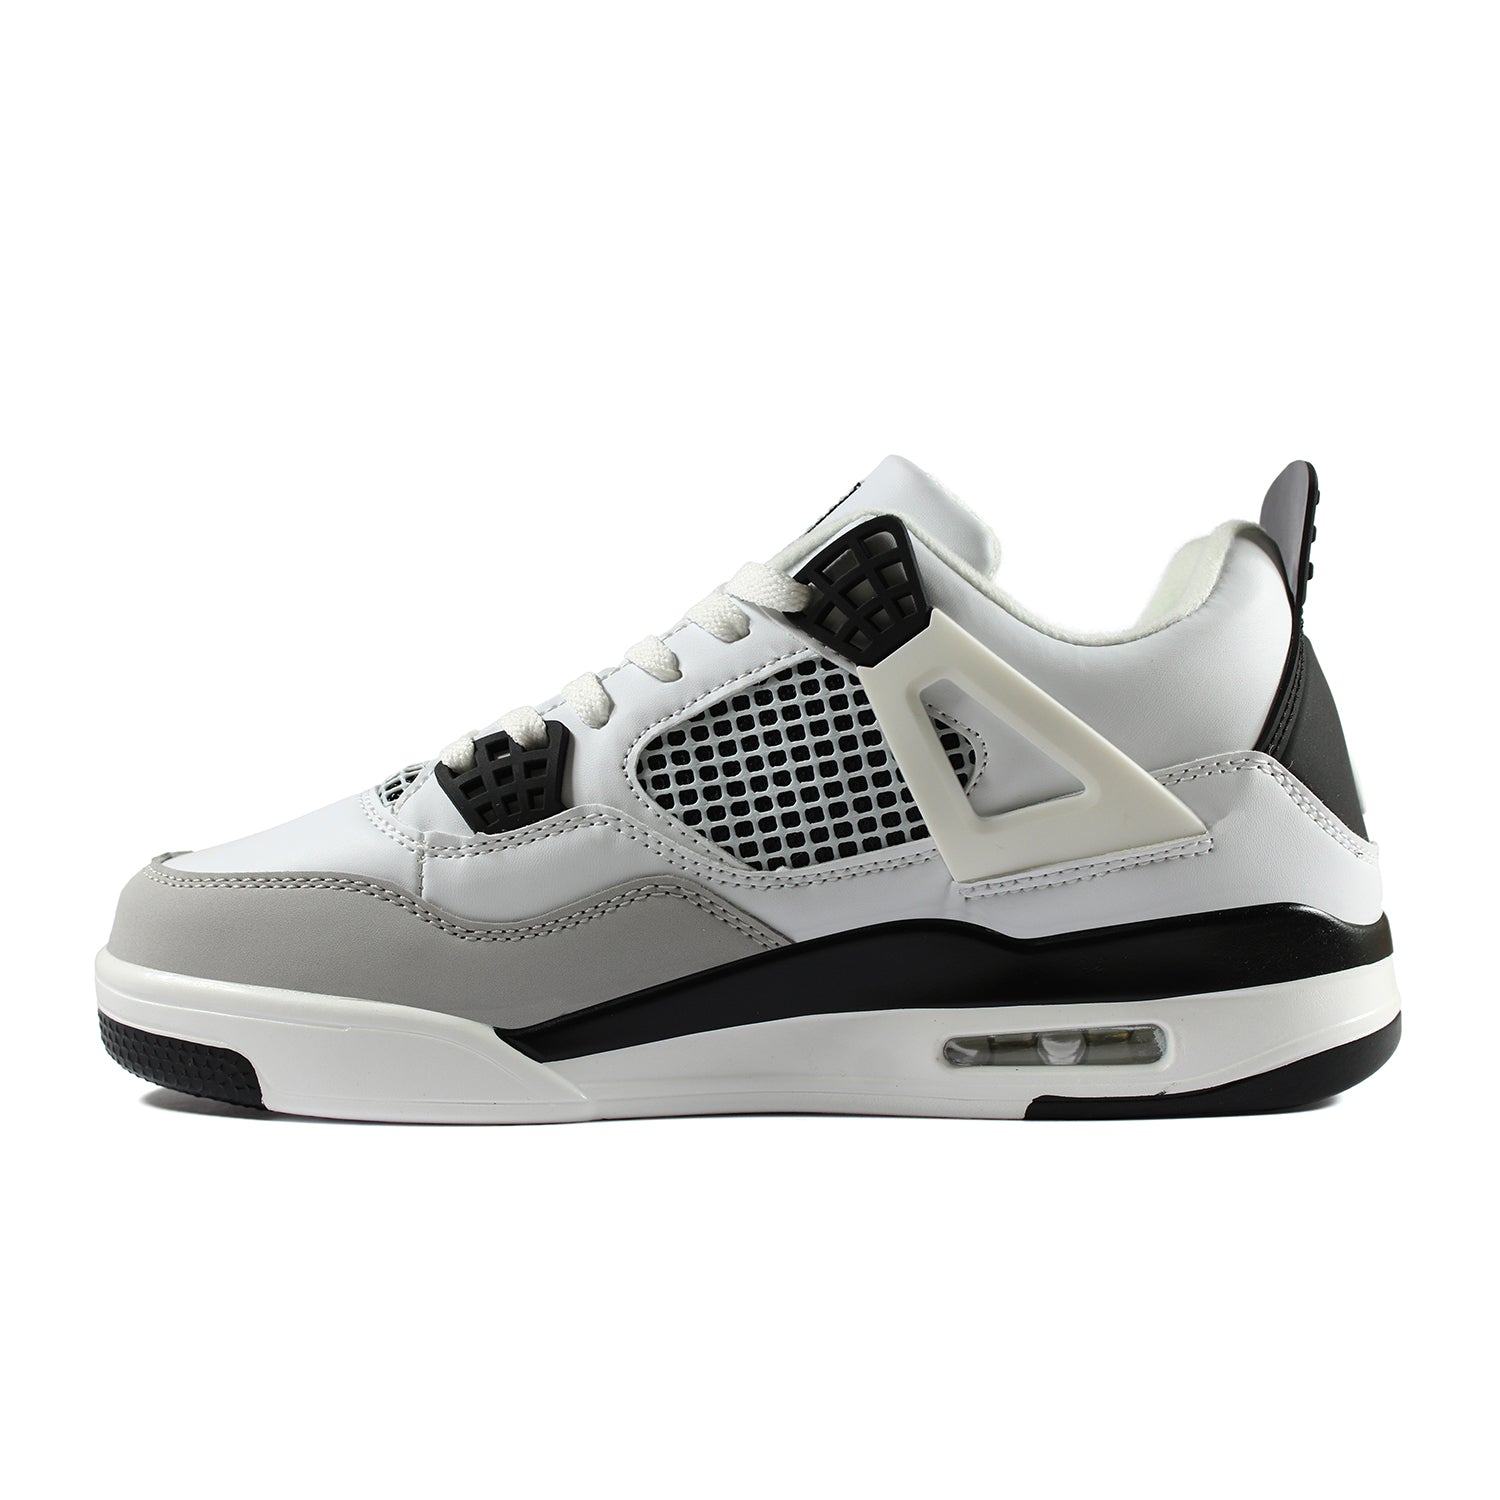 Tracer Shoes | White Black | Men's Collection